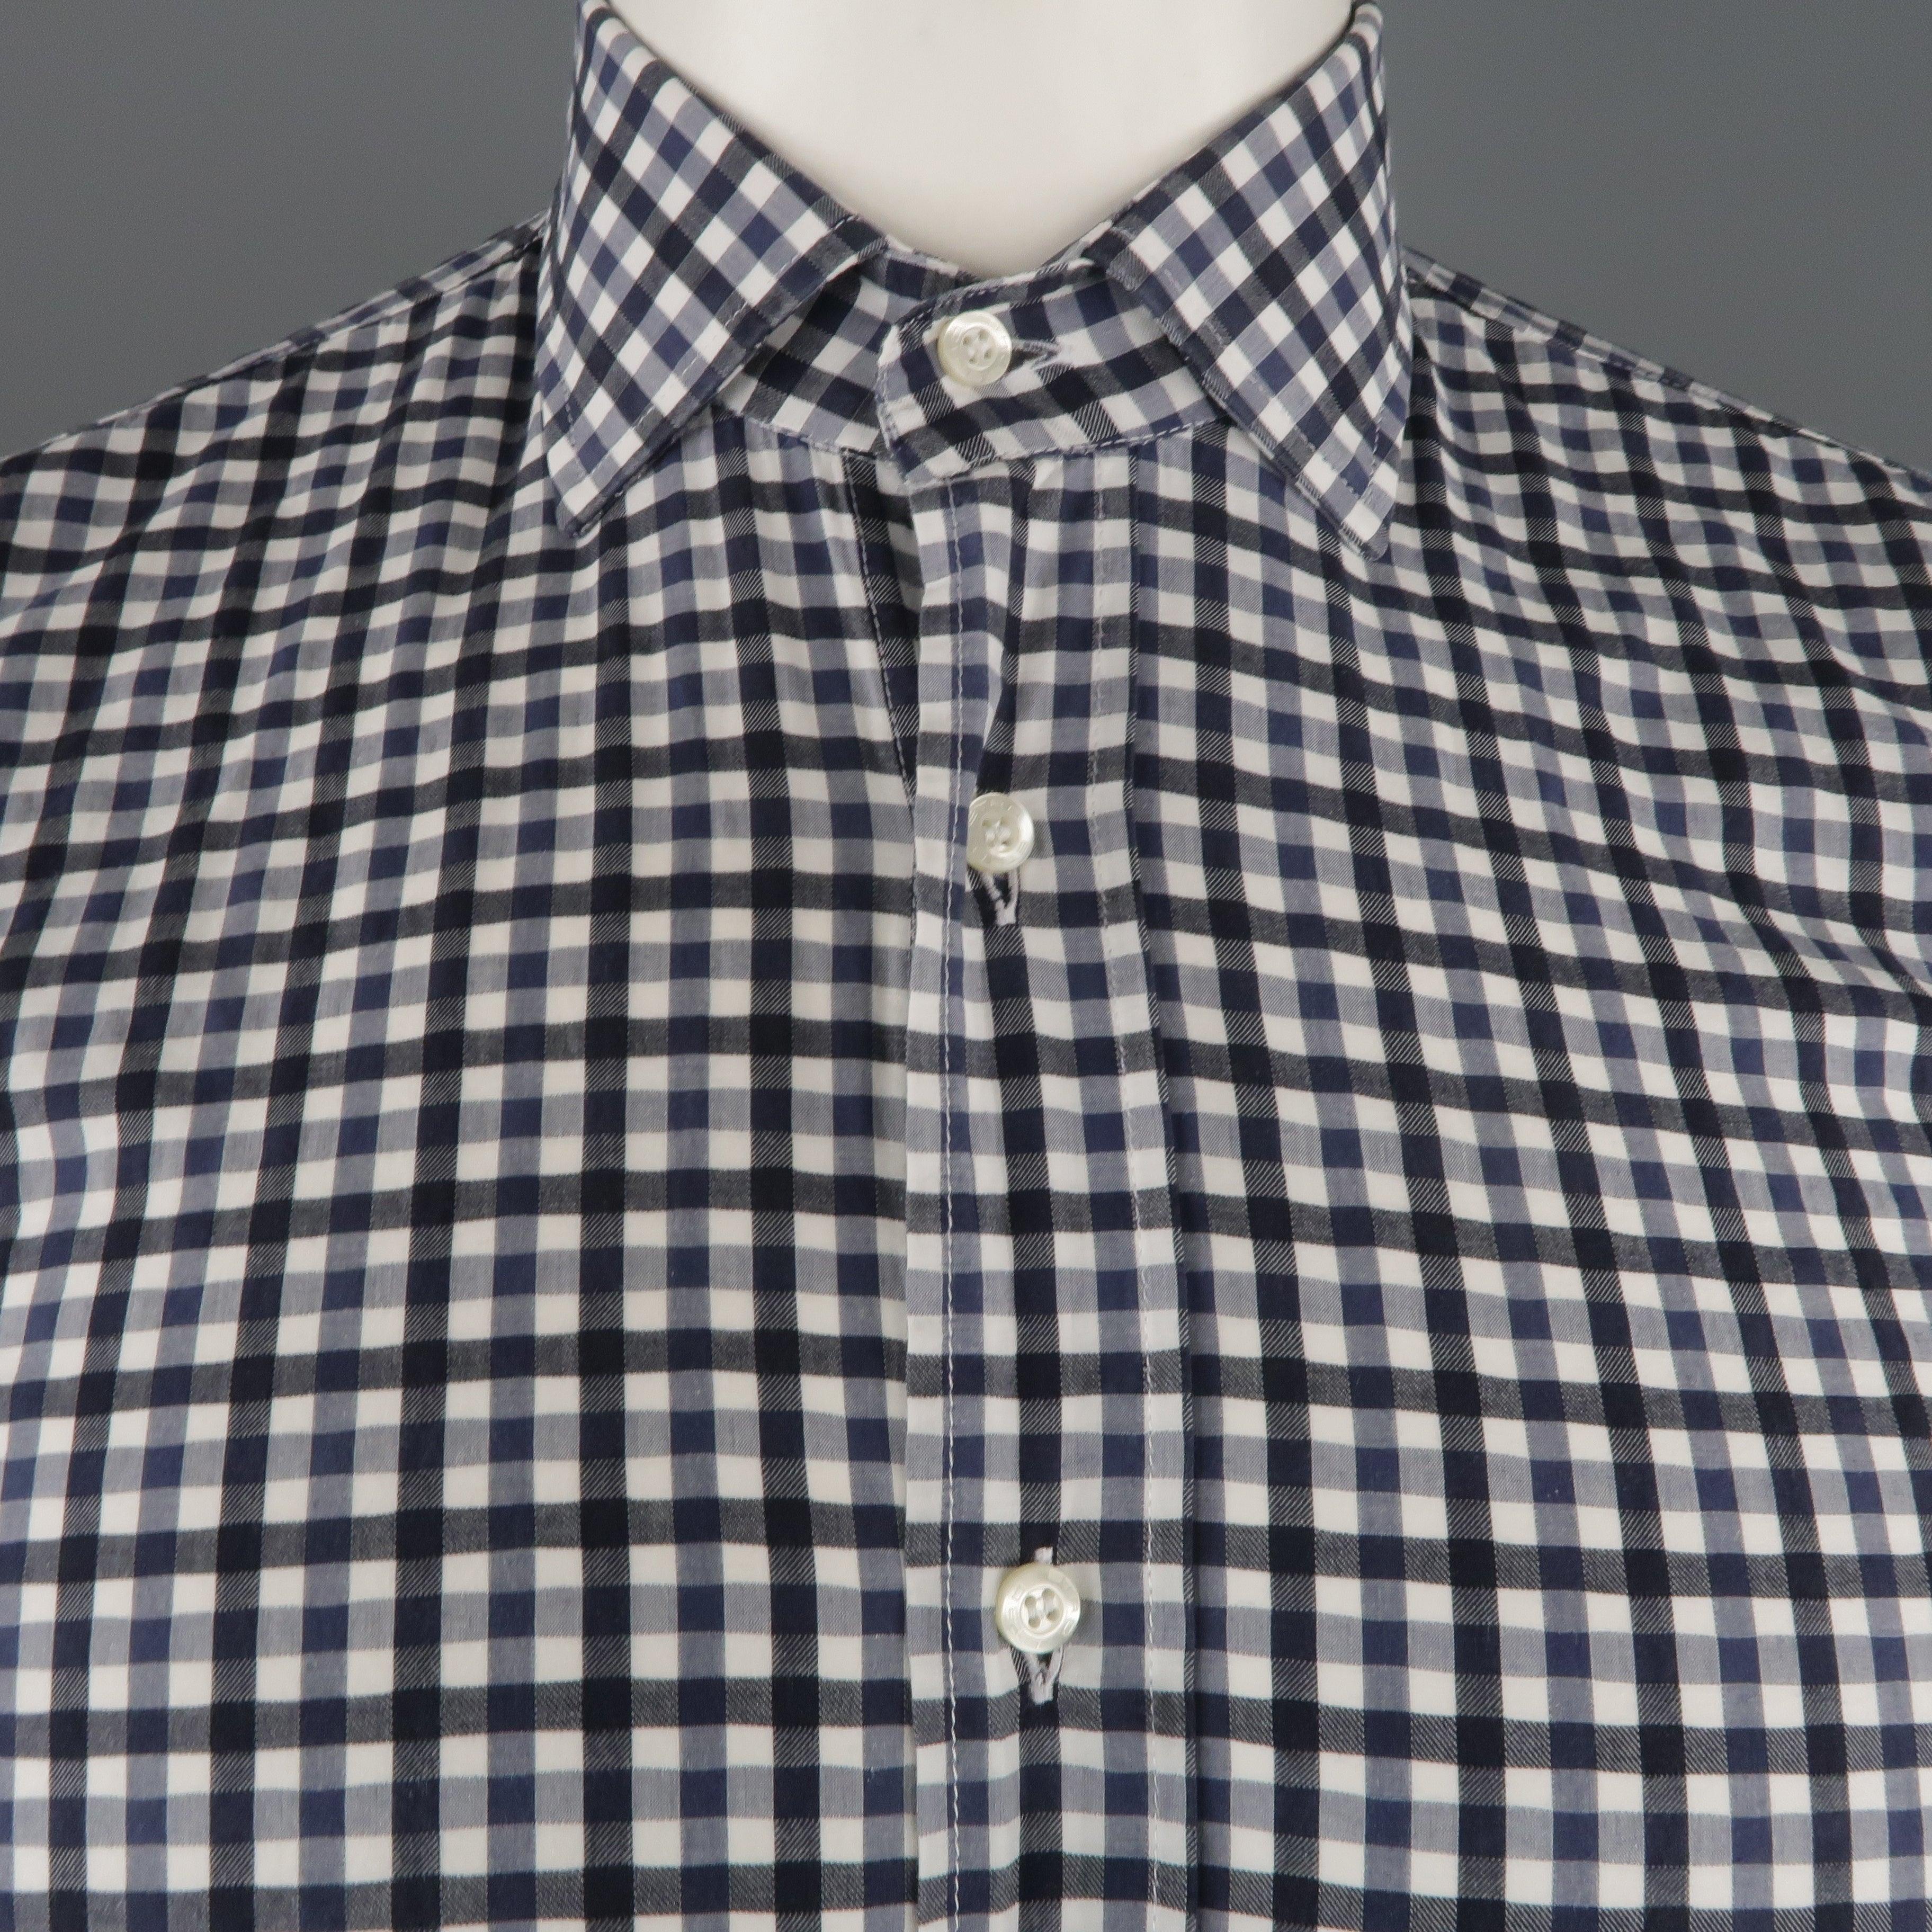 ETRO shirt comes in a black and white checkered cotton featuring a spread collar. Made in Italy.Excellent Pre-Owned Condition. 

Marked:   39 

Measurements: 
 
Shoulder: 17.5 inches  Chest: 42 inches  Sleeve: 24.5 inches Length: 25.5 inches  
 
  
